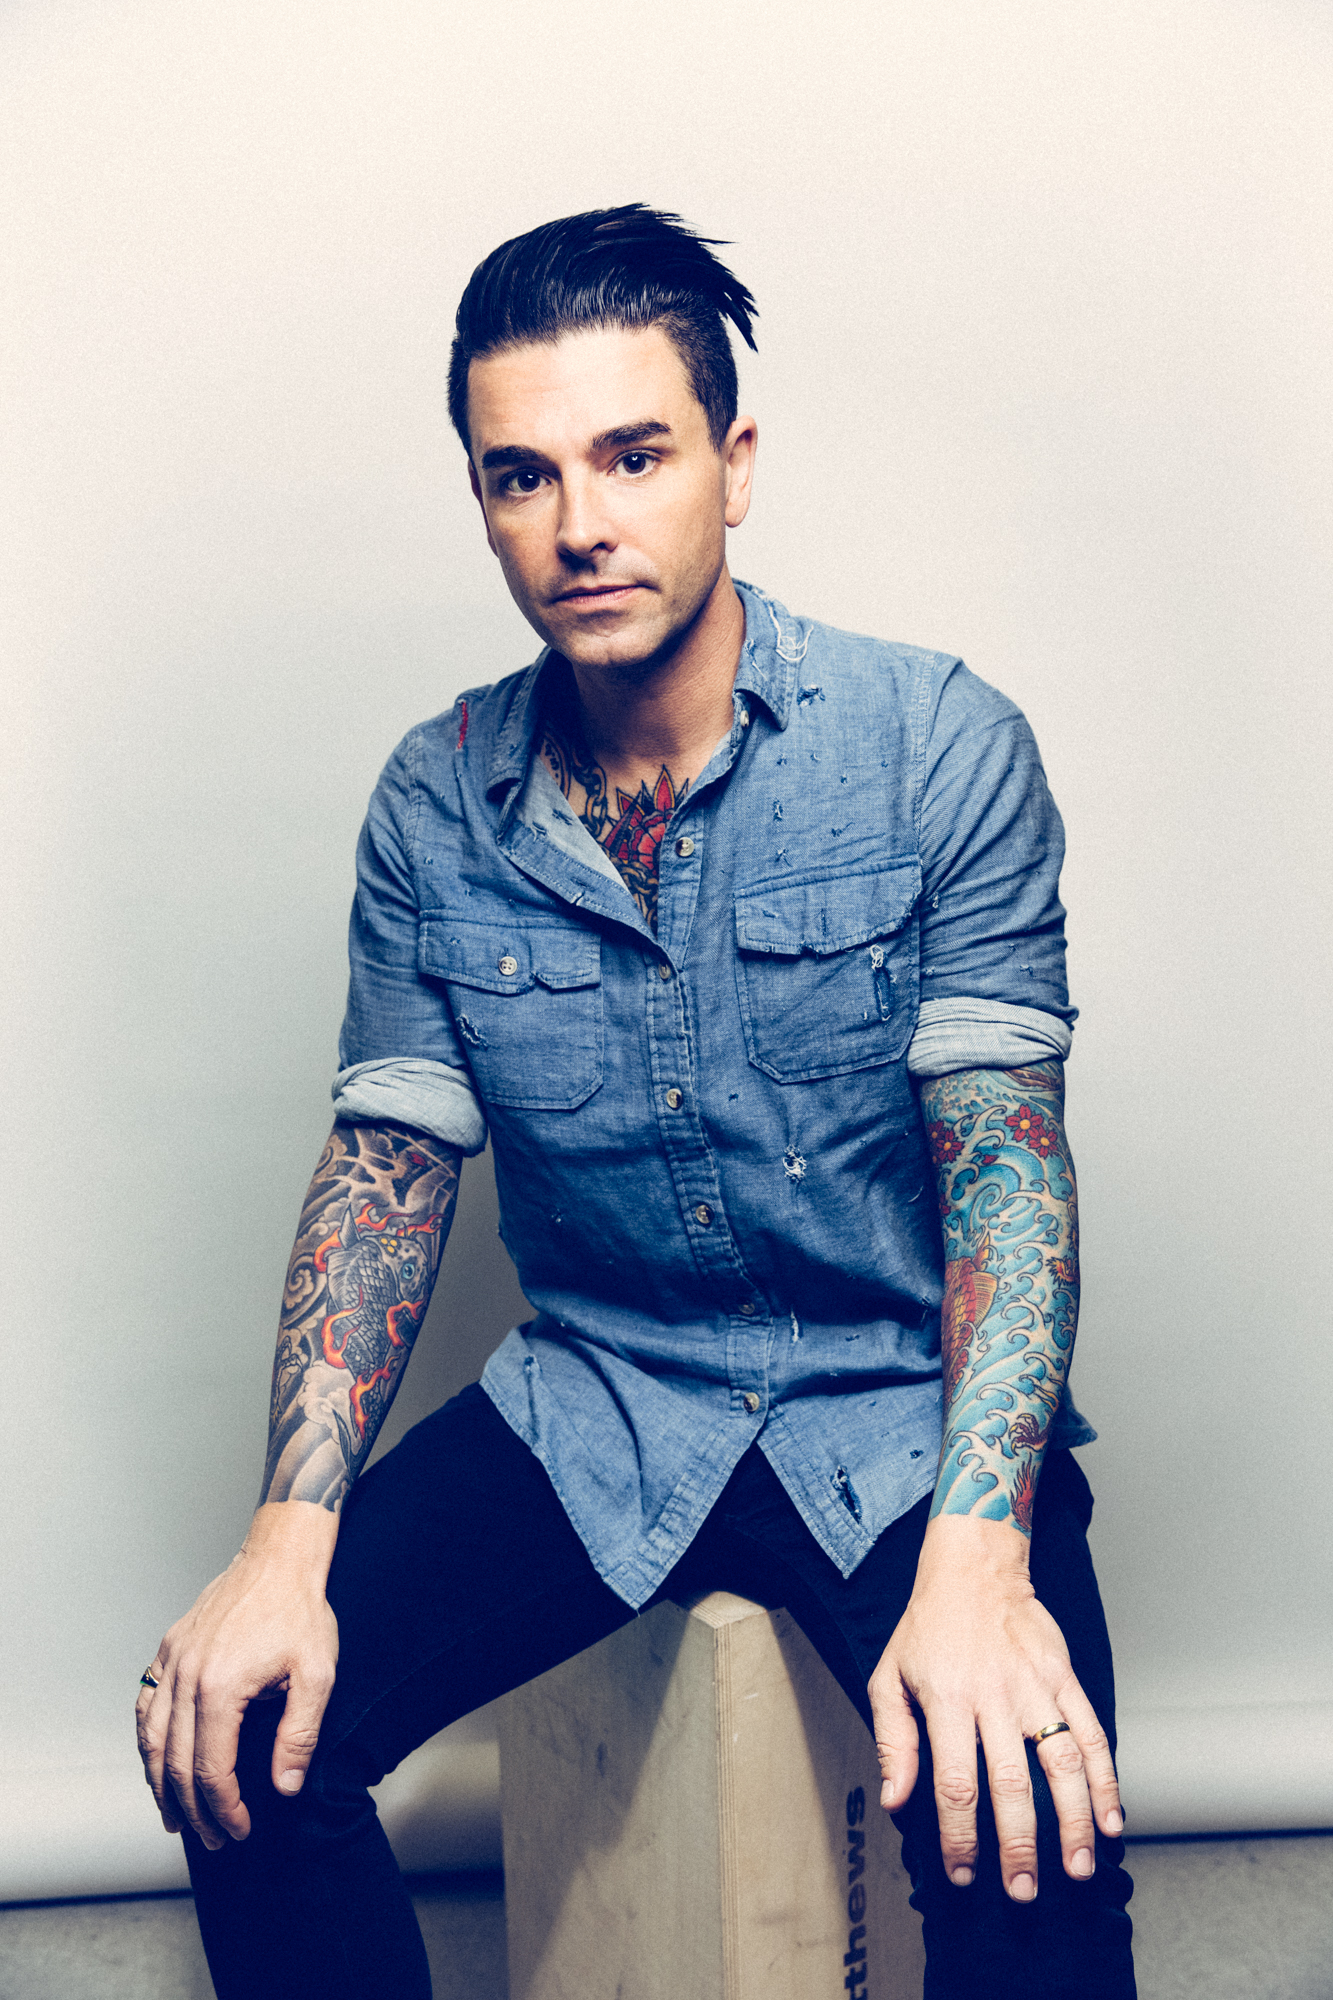  Chris Carrabba of Dashboard Confessional 